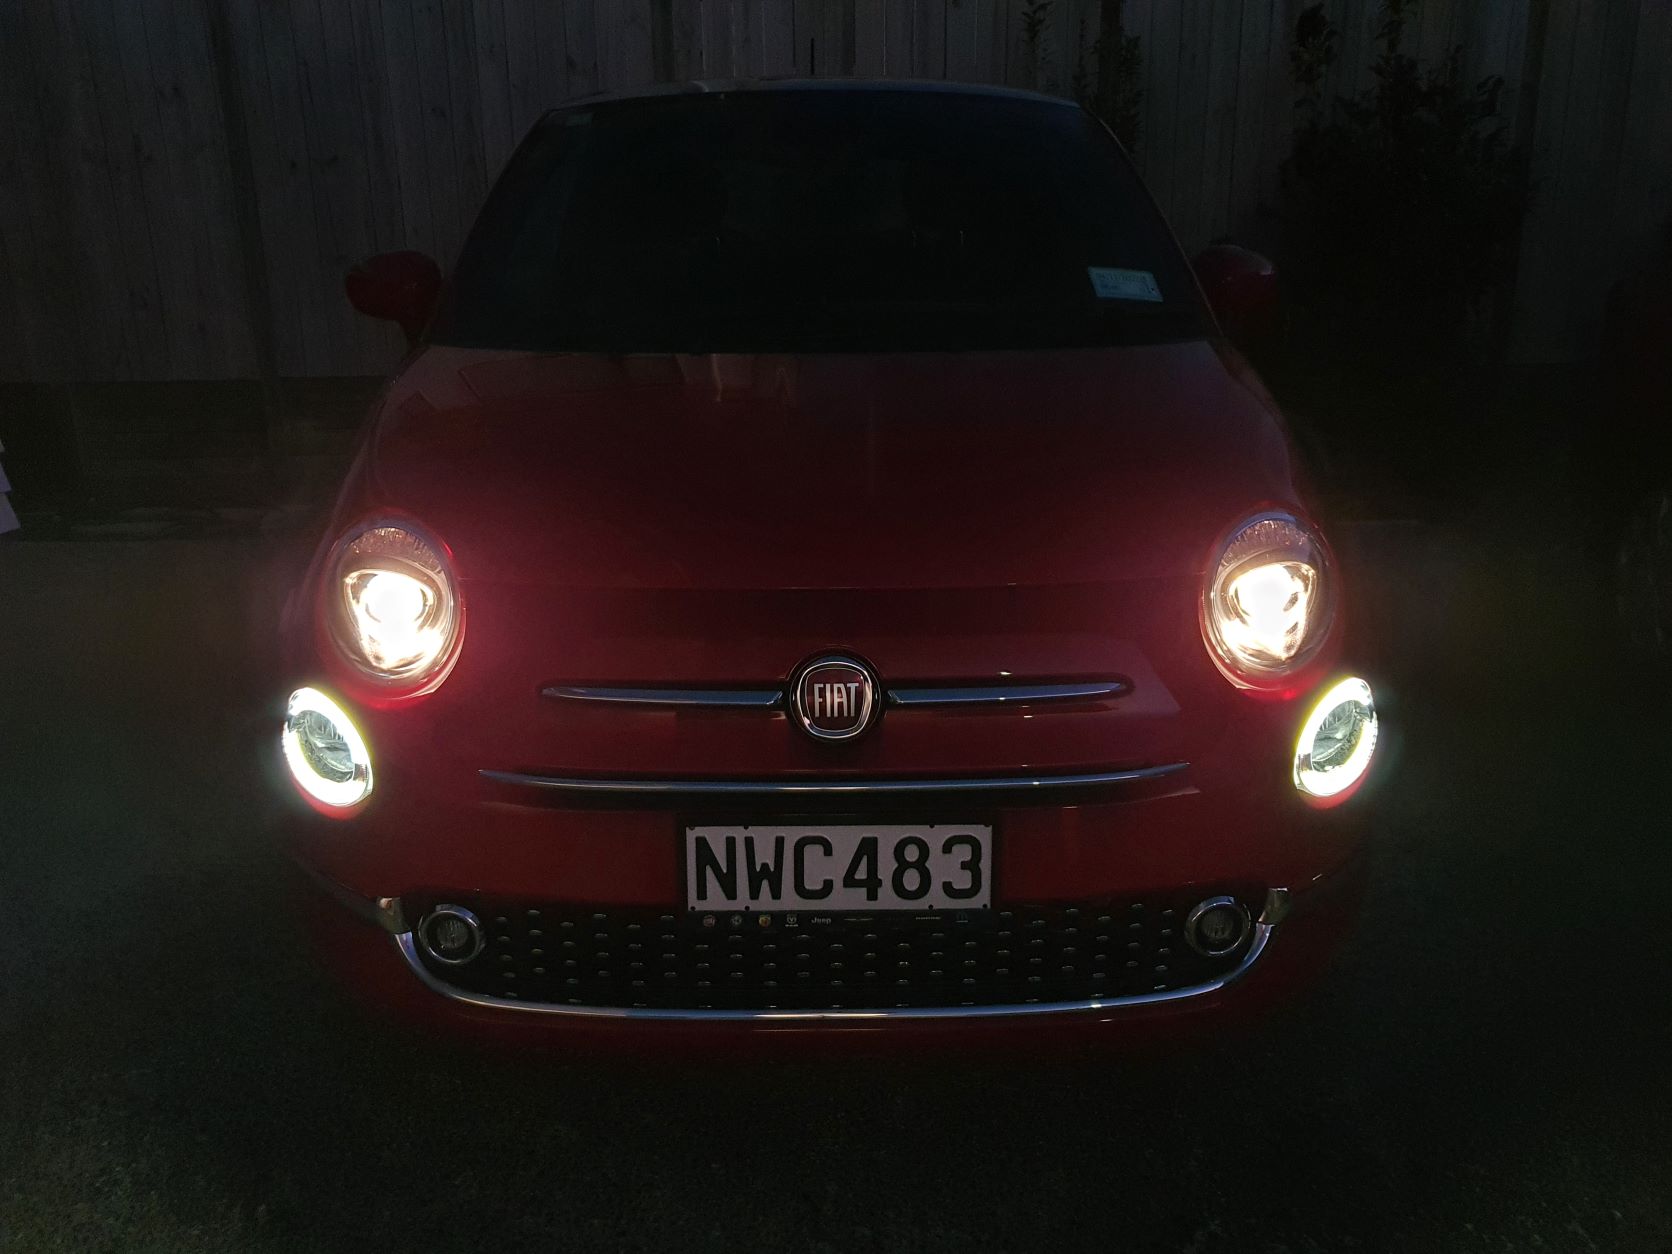 Headlights and LEDs on the front of the new Fiat 500 Dolcevita